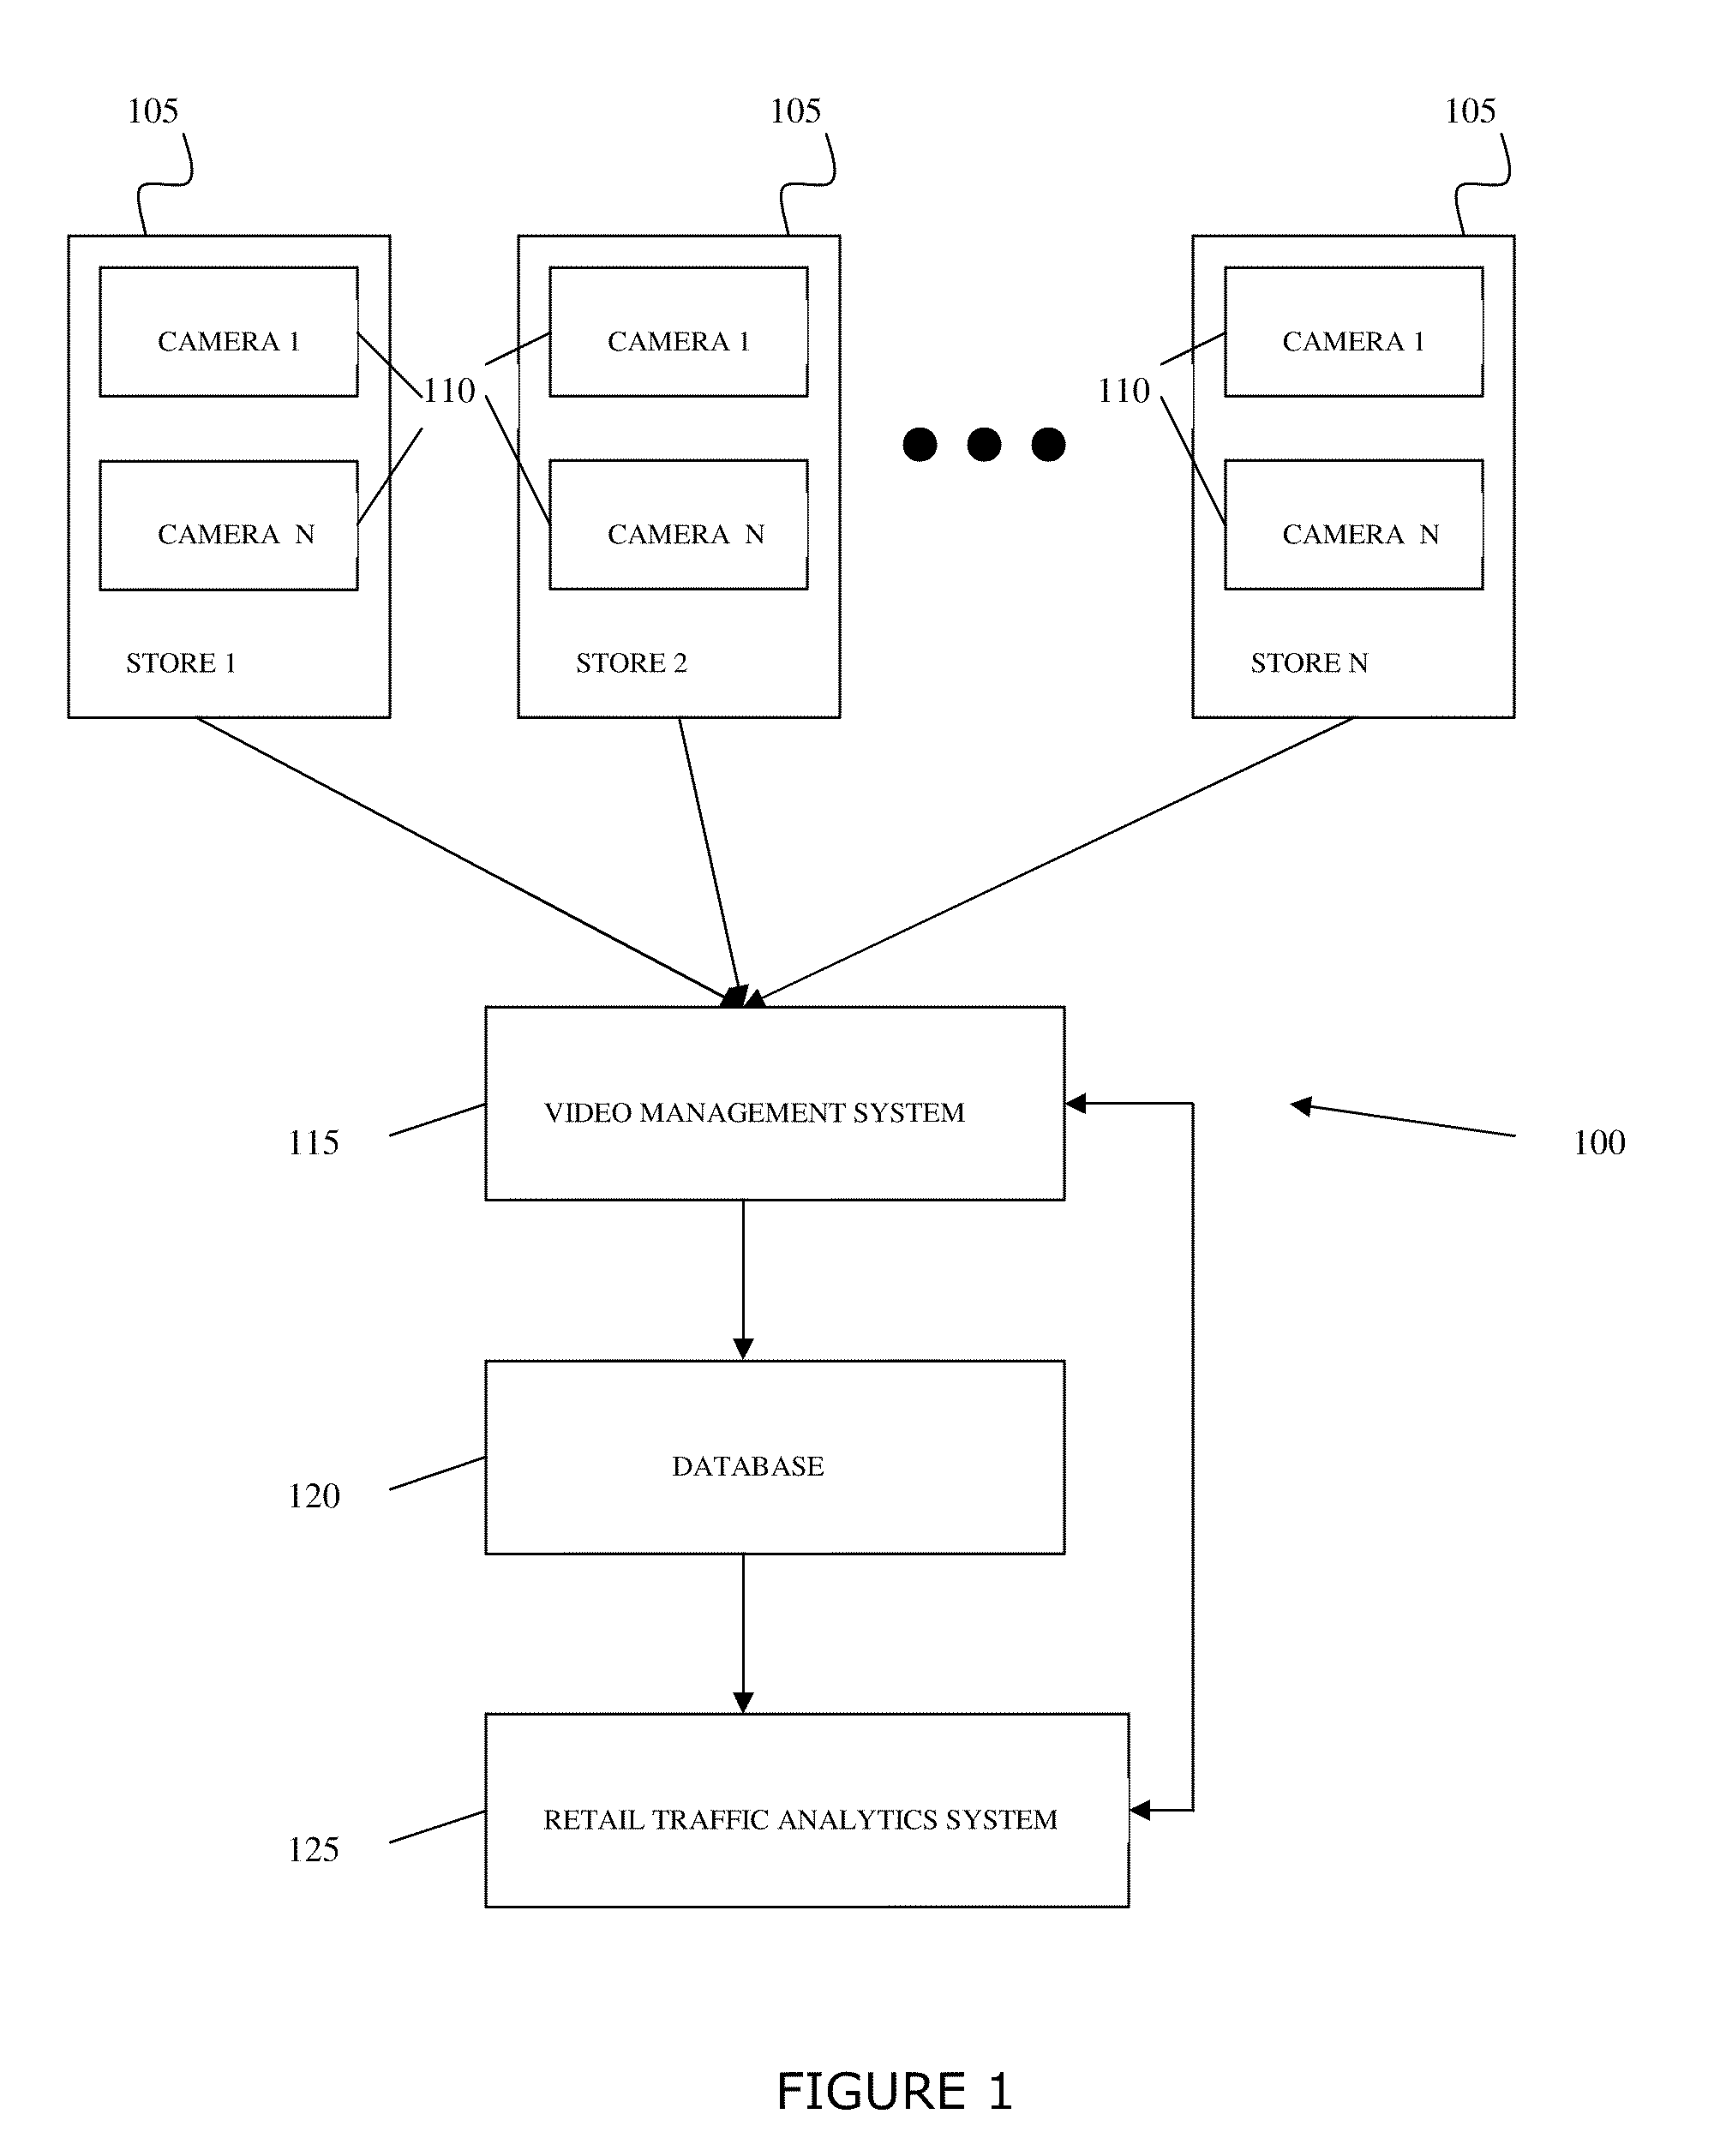 System and method for capturing, storing, analyzing and displaying data relating to the movements of objects